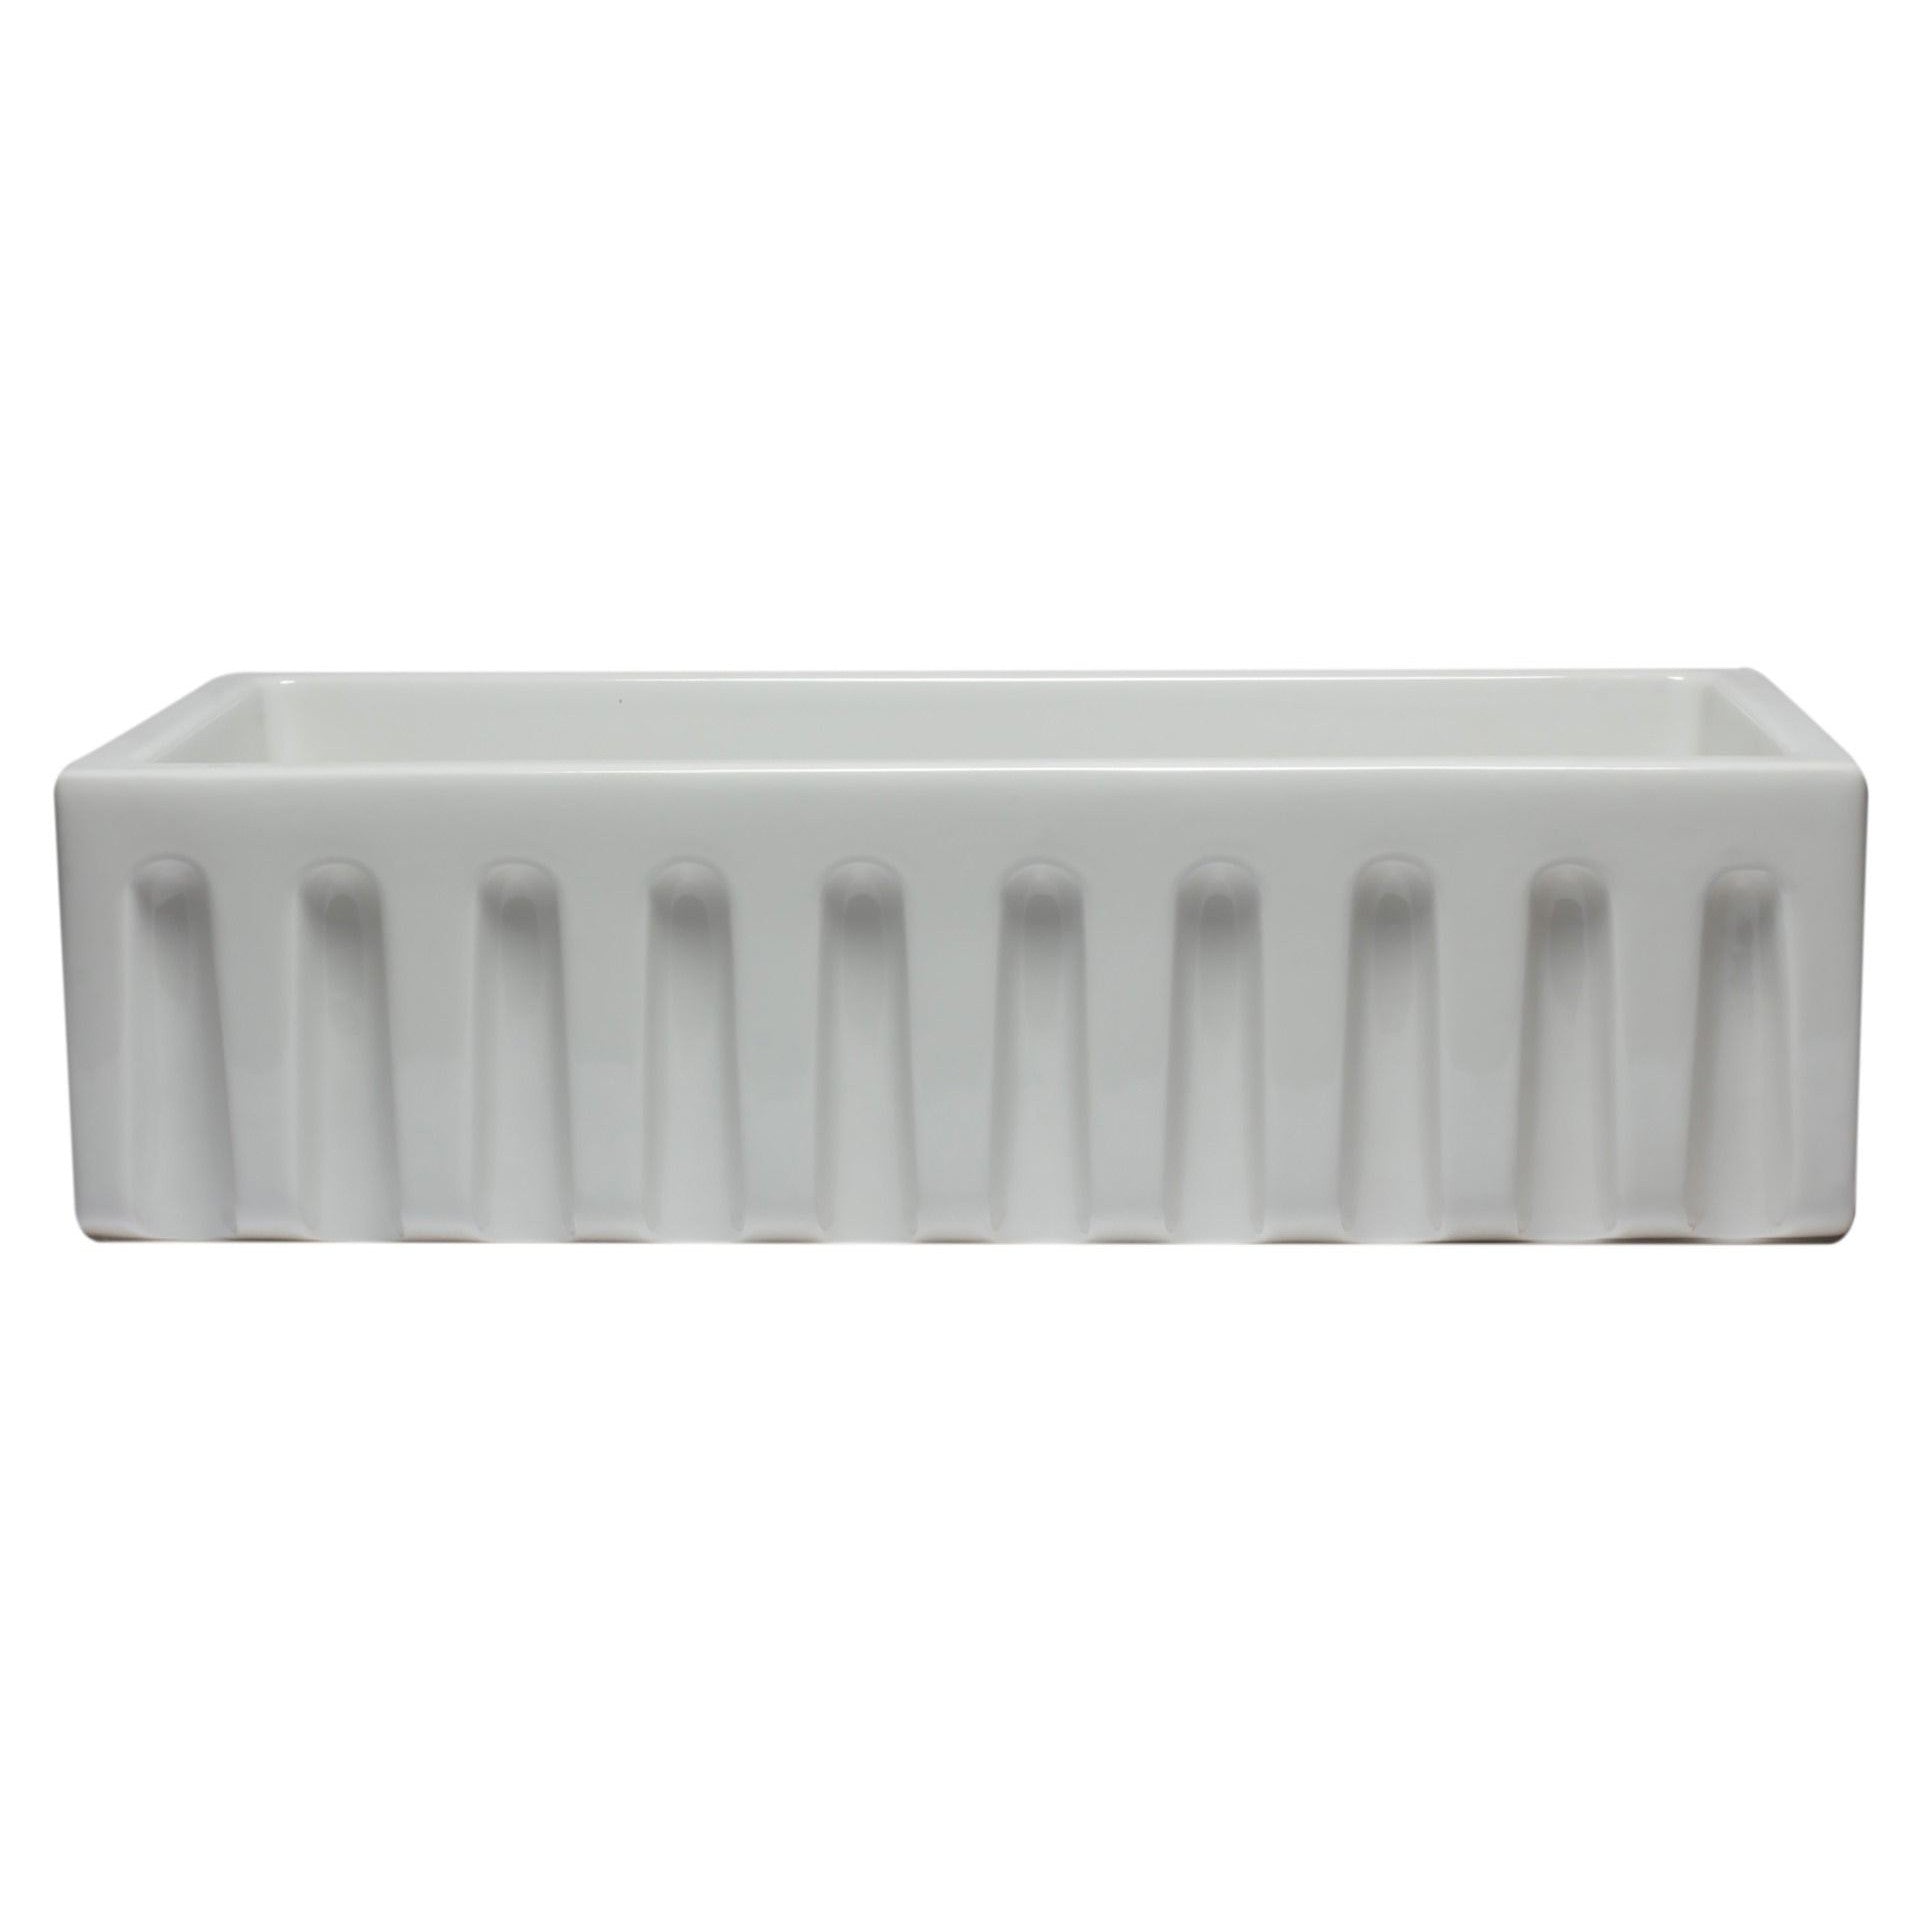 ALFI Brand AB3618HS-W 36 inch White Reversible Smooth / Fluted Single Bowl Fireclay Farm Sink